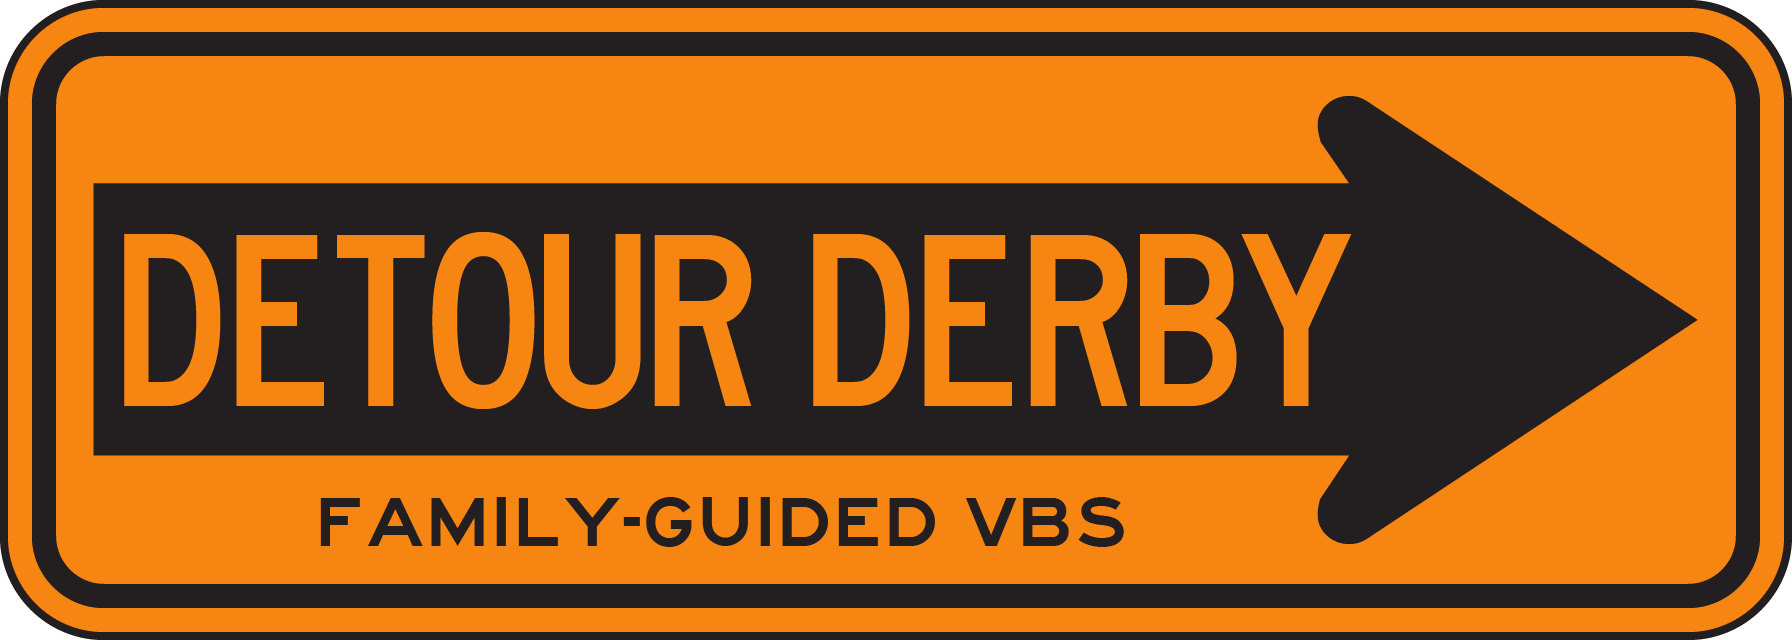 Detour Derby - Family-Guided VBS